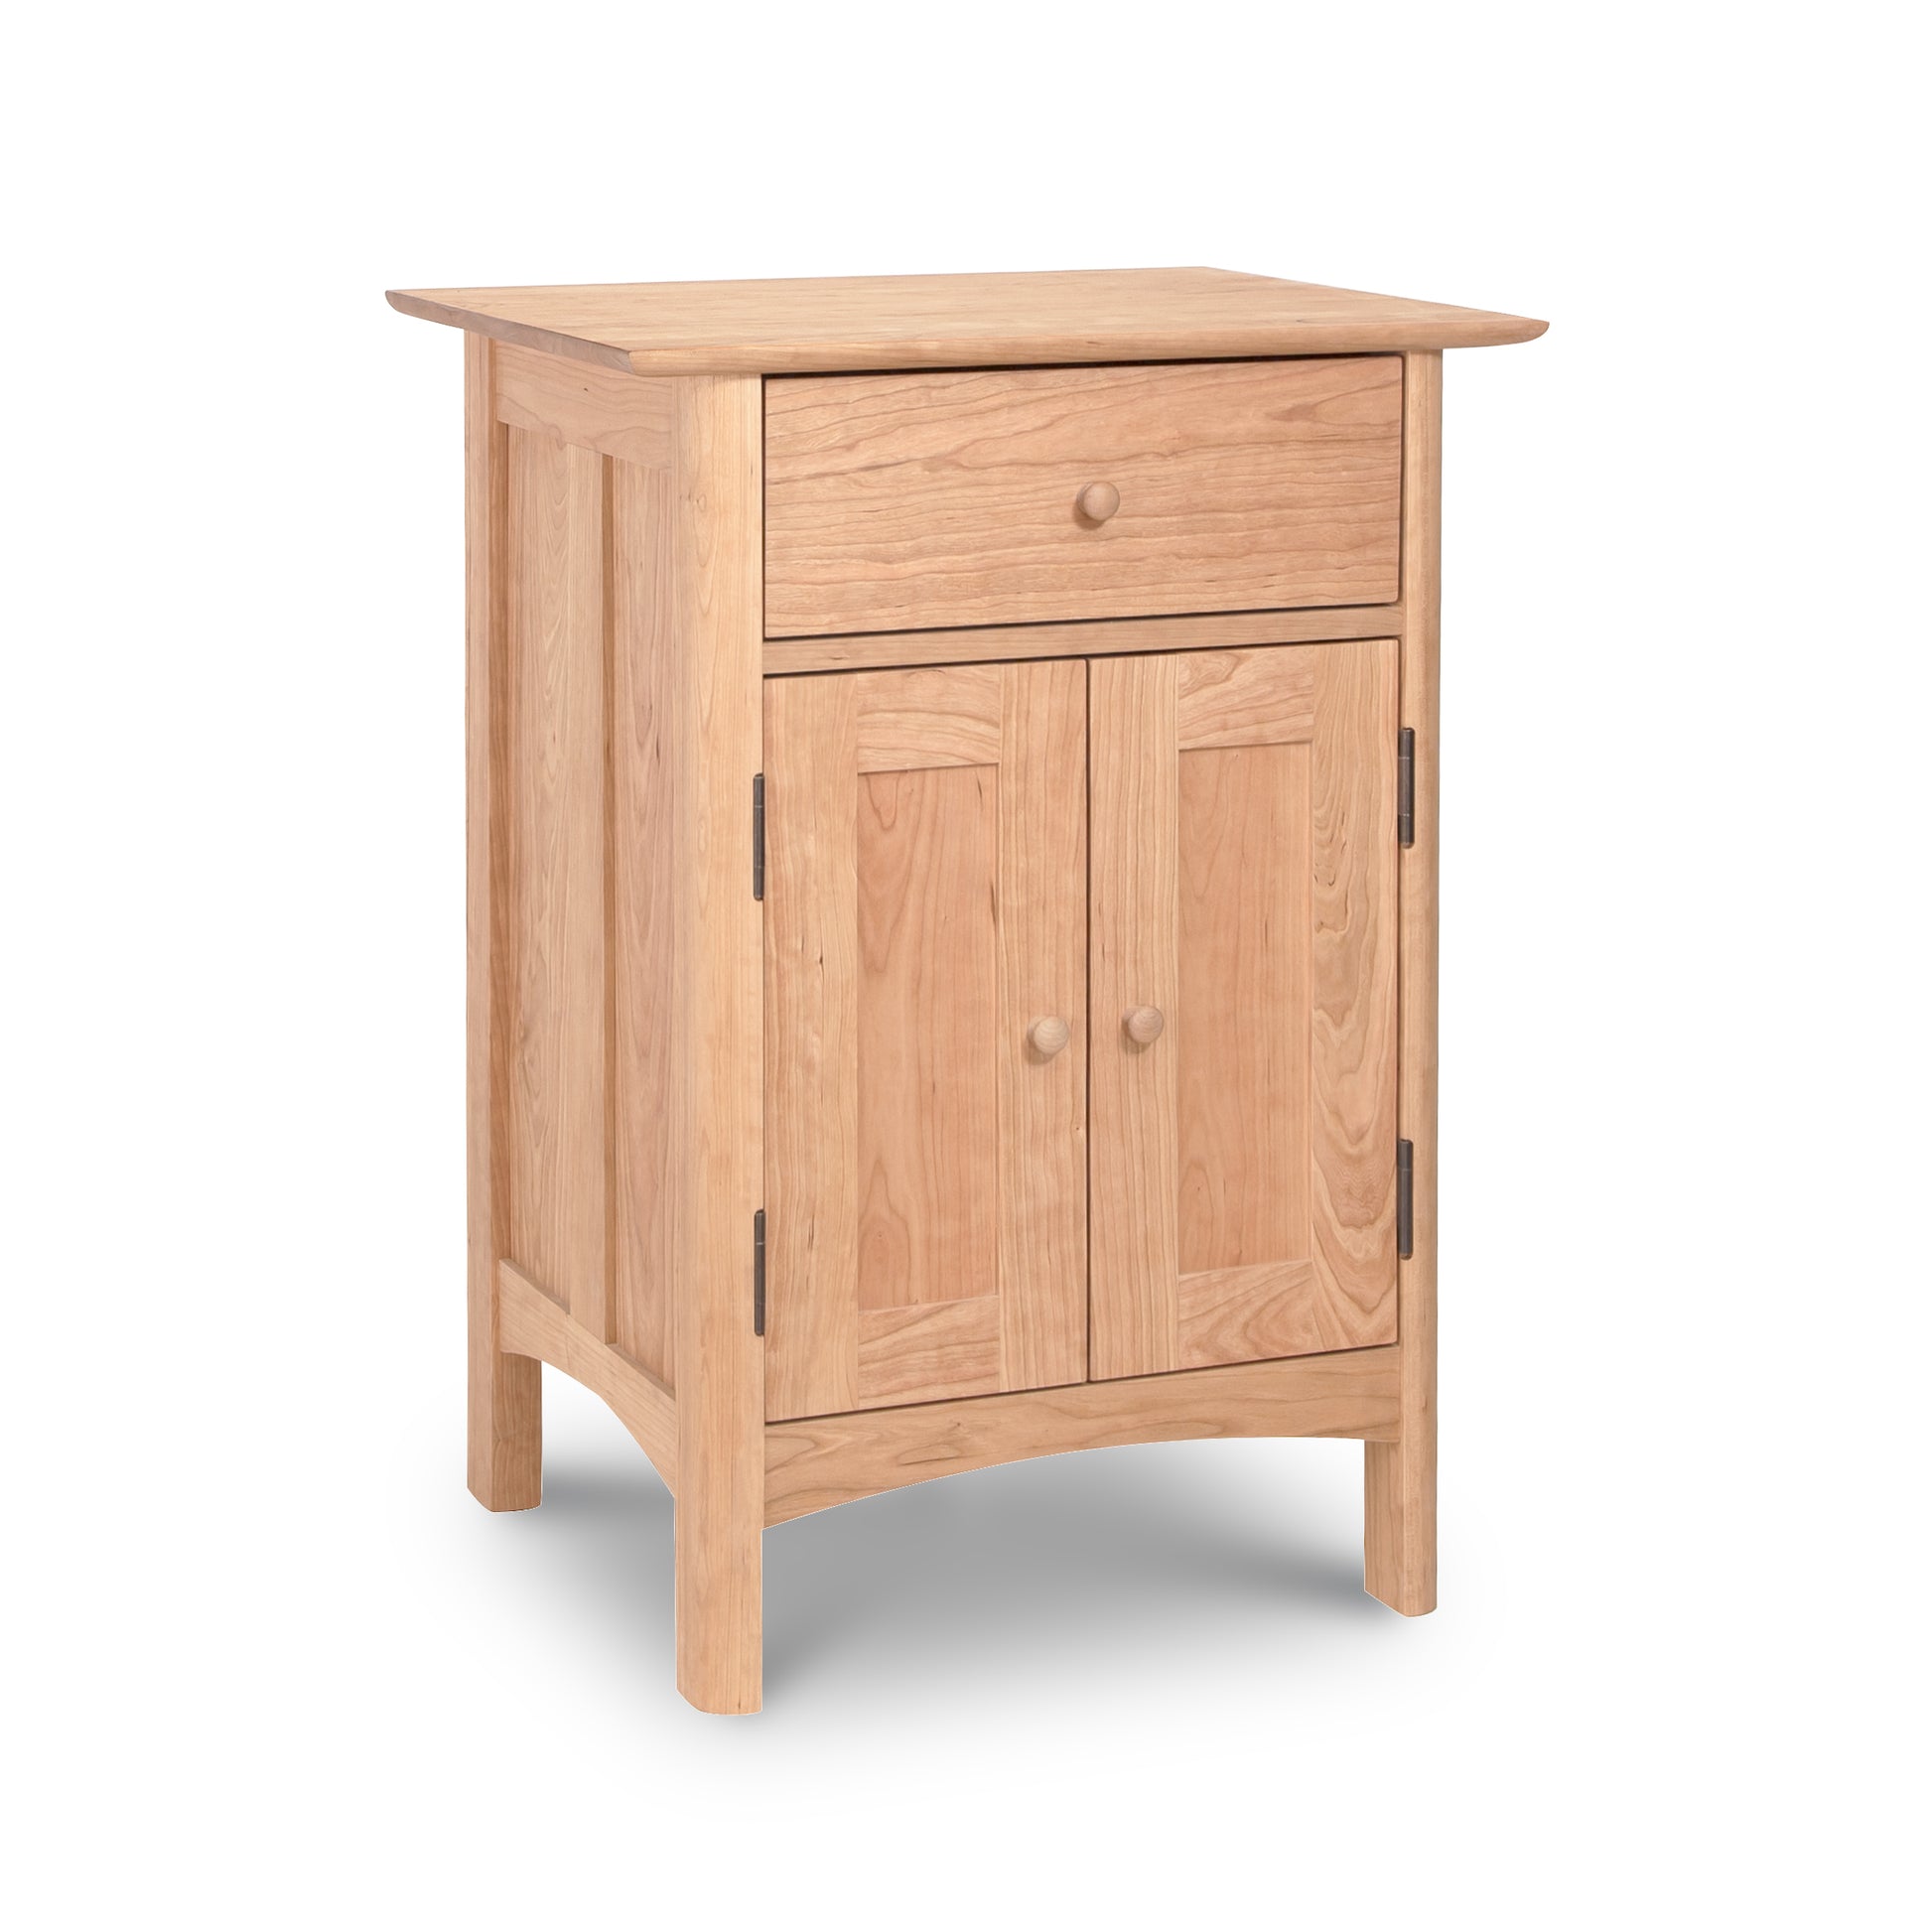 A Vermont Furniture Designs Heartwood Shaker Short Storage Chest, a luxury wooden nightstand with two drawers and a door, providing ample storage space.